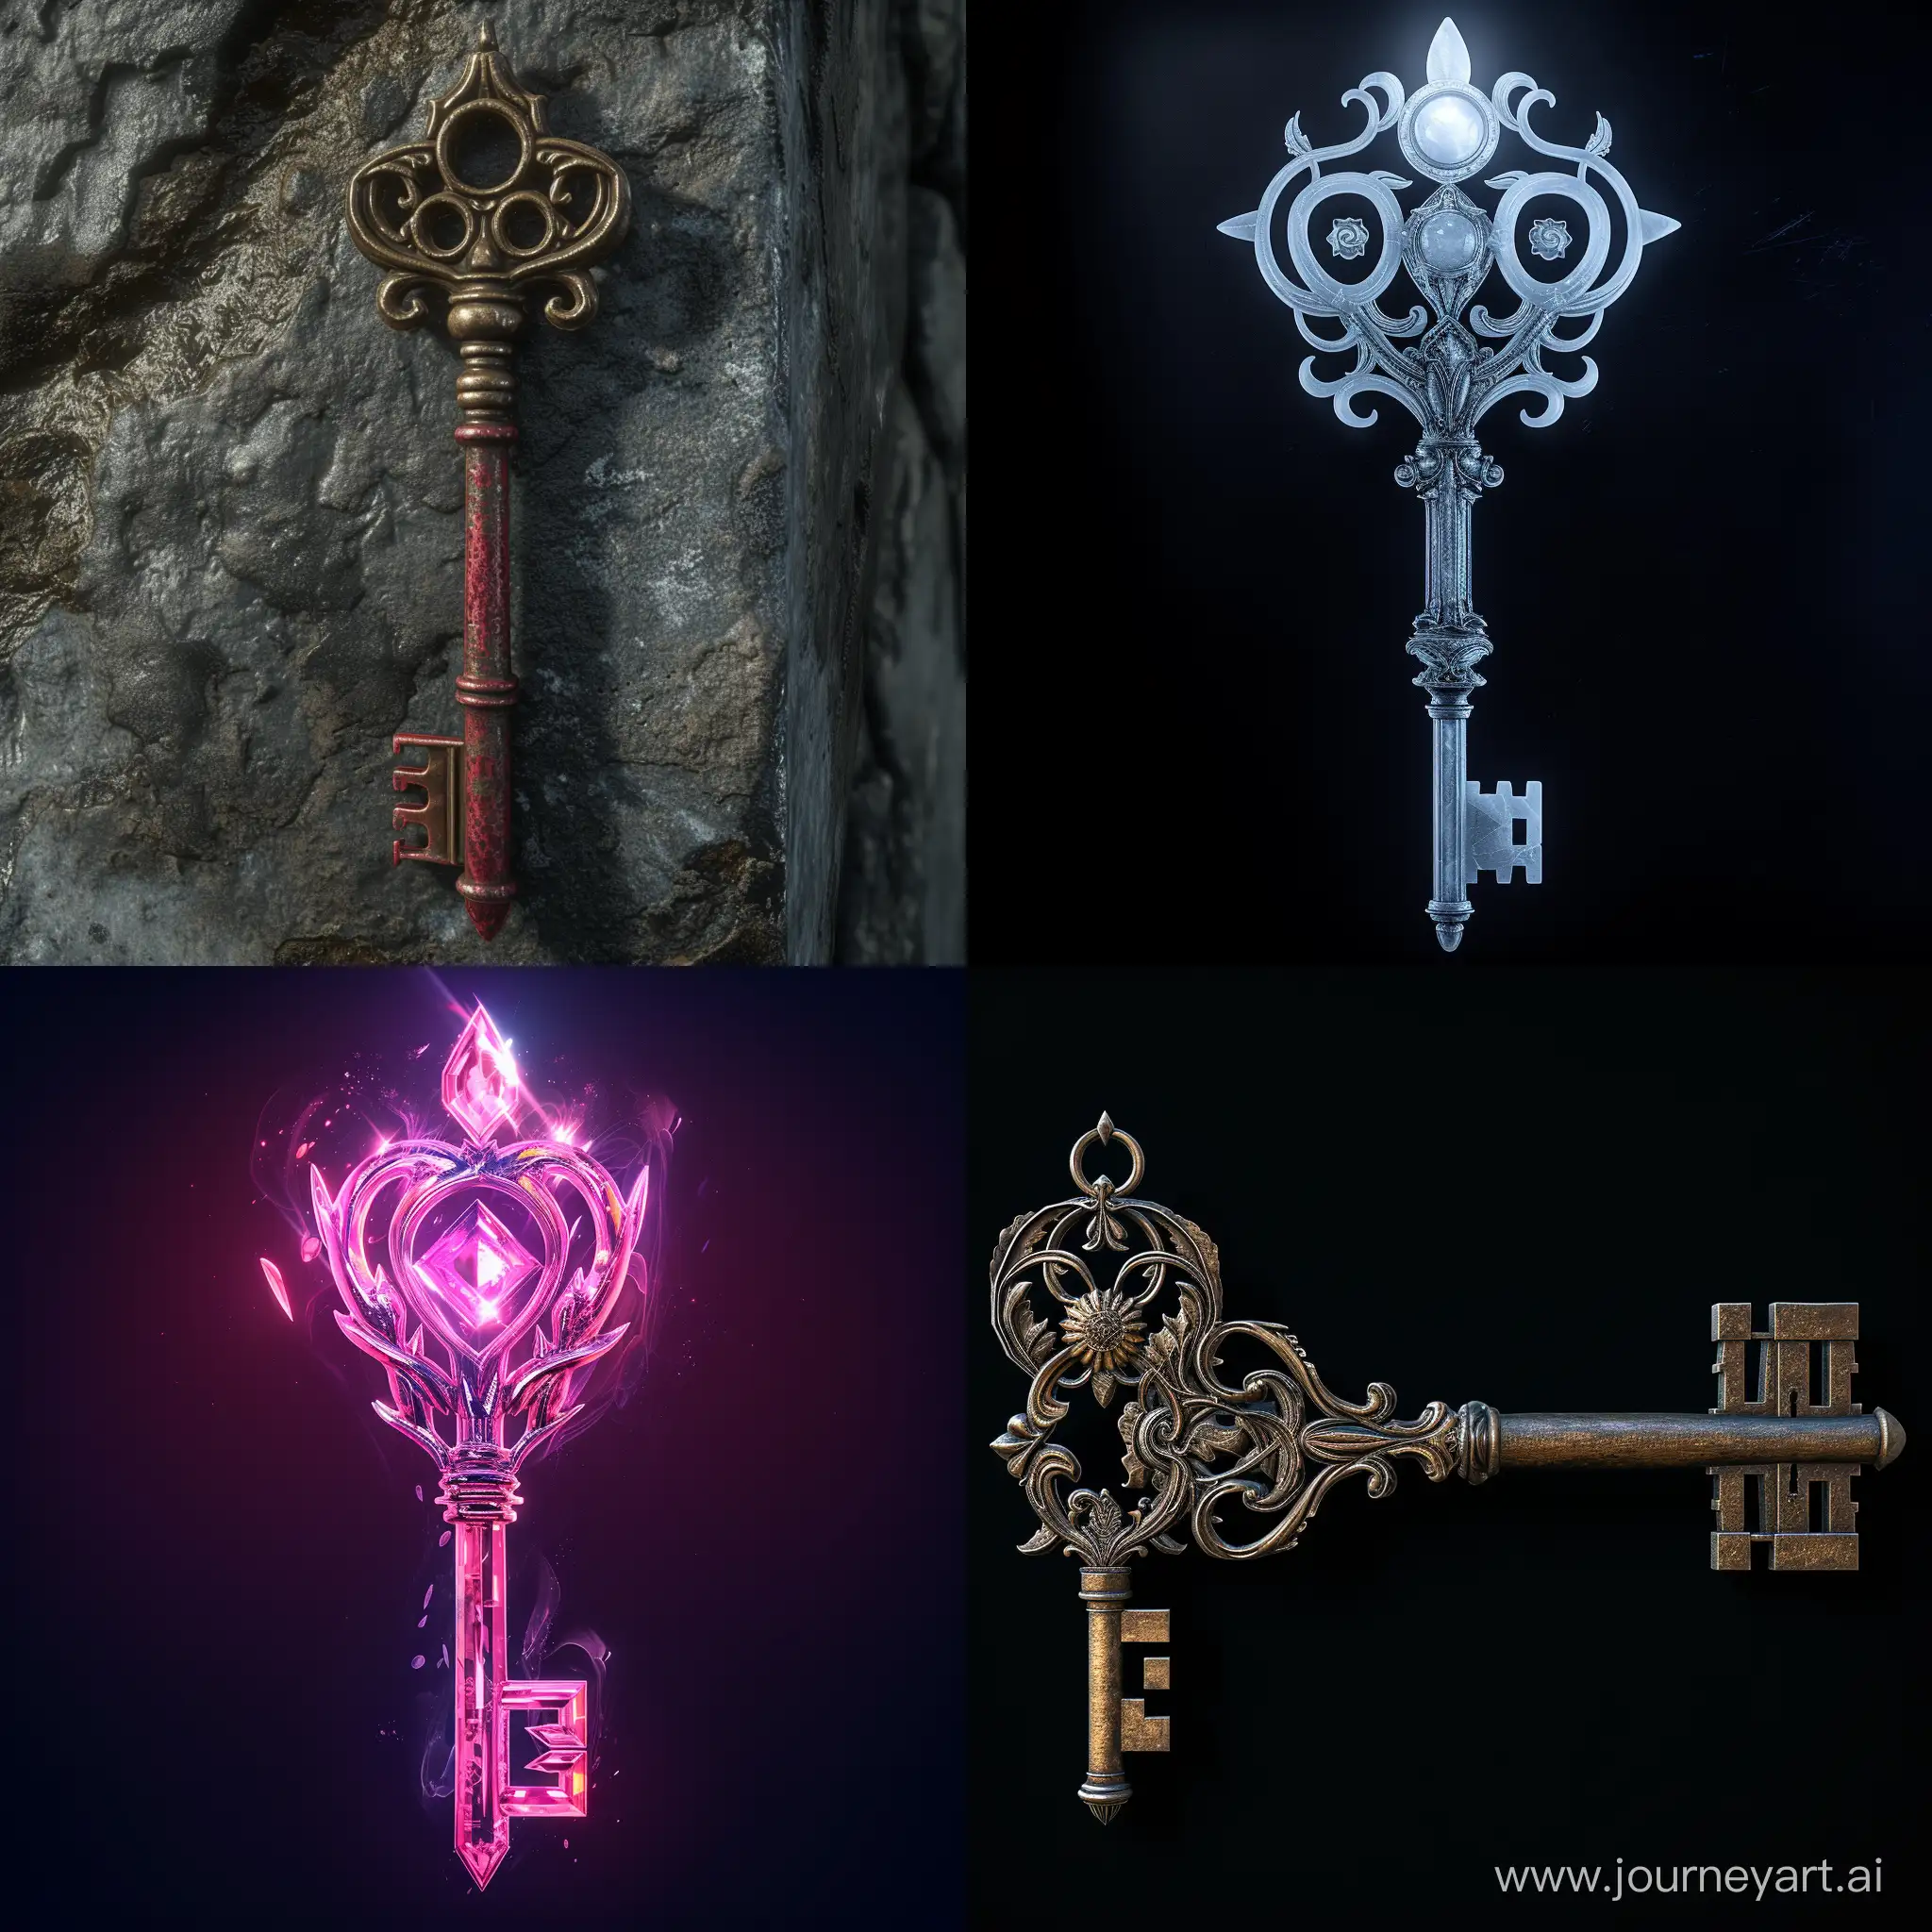 The realistic Spectral Key